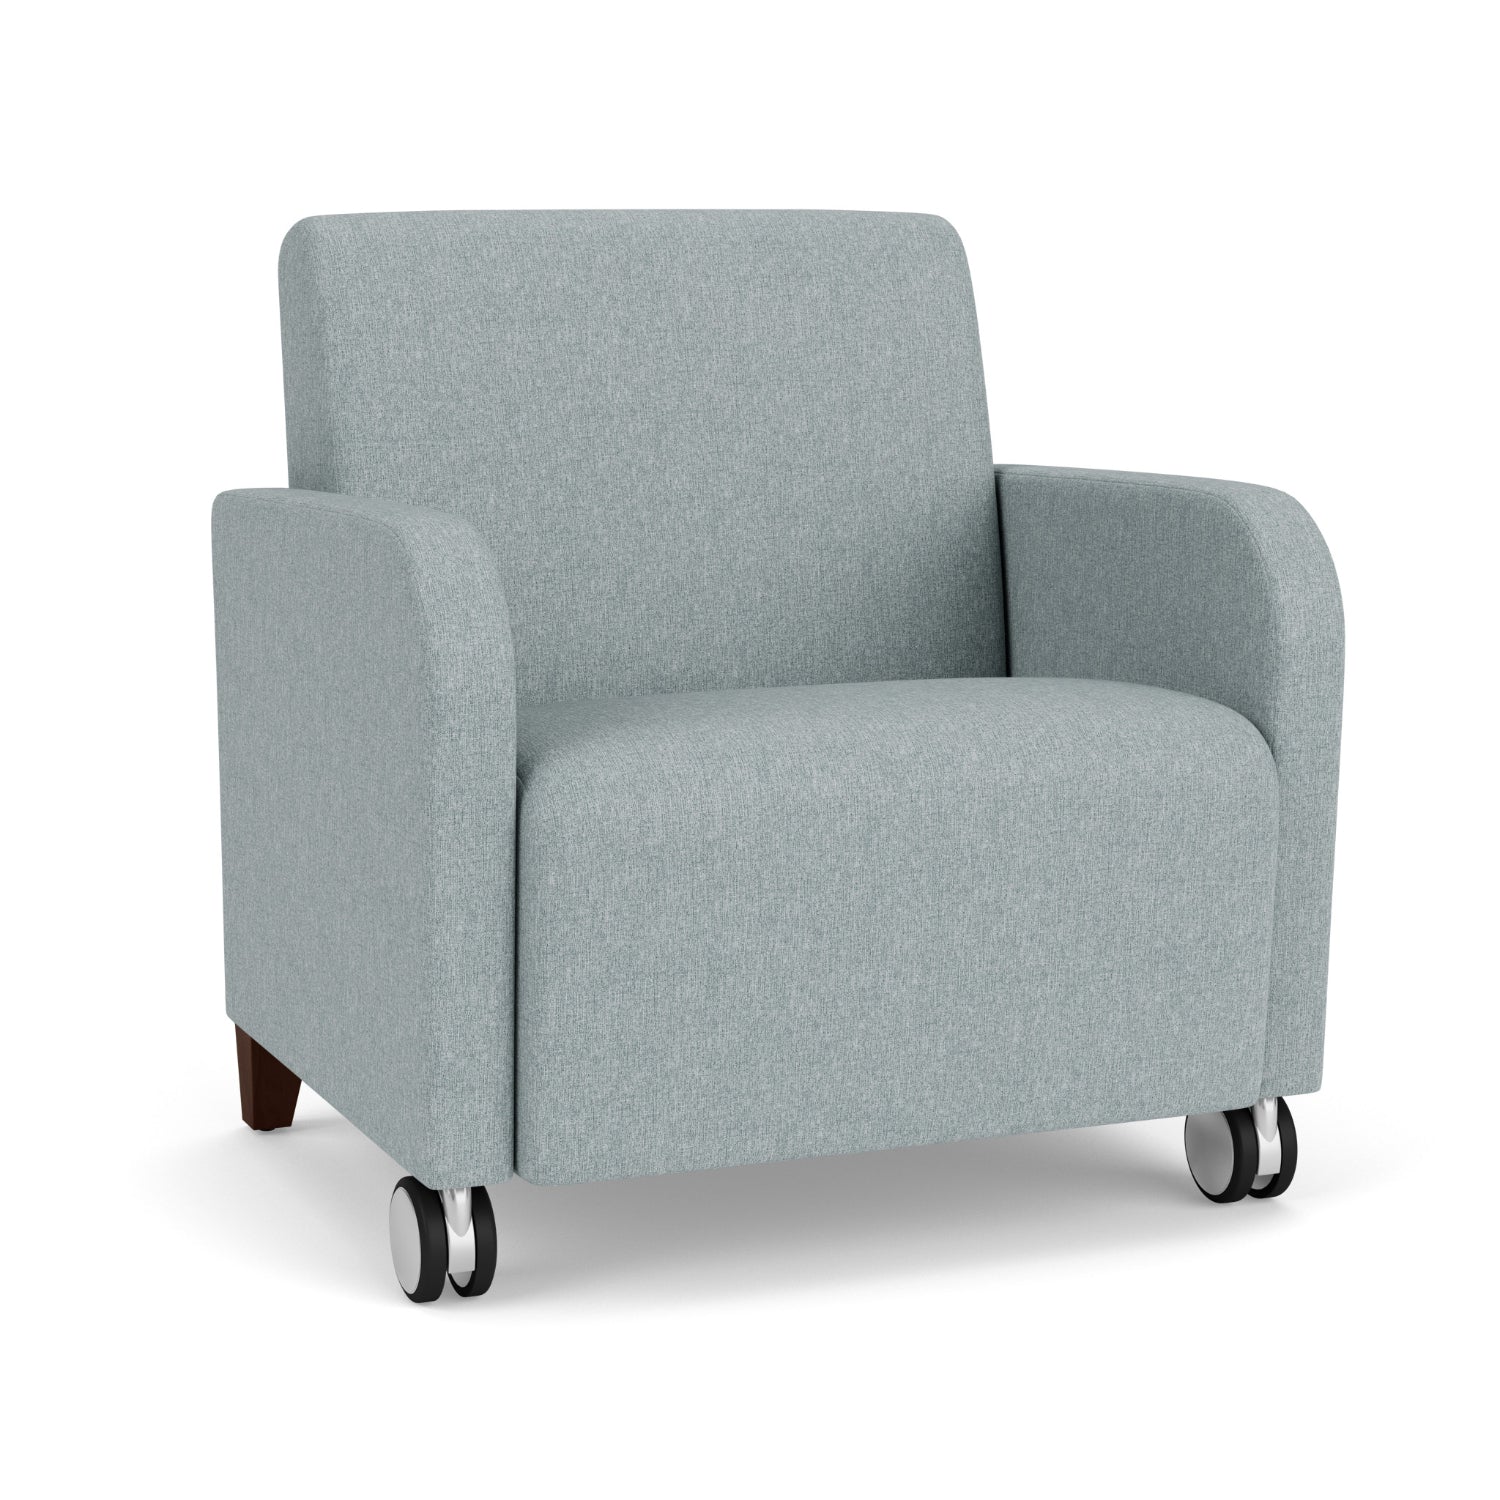 Siena Collection Reception Seating, Oversize Guest Chair with Front Casters, 500 lb. Capacity, Healthcare Vinyl Upholstery, FREE SHIPPING